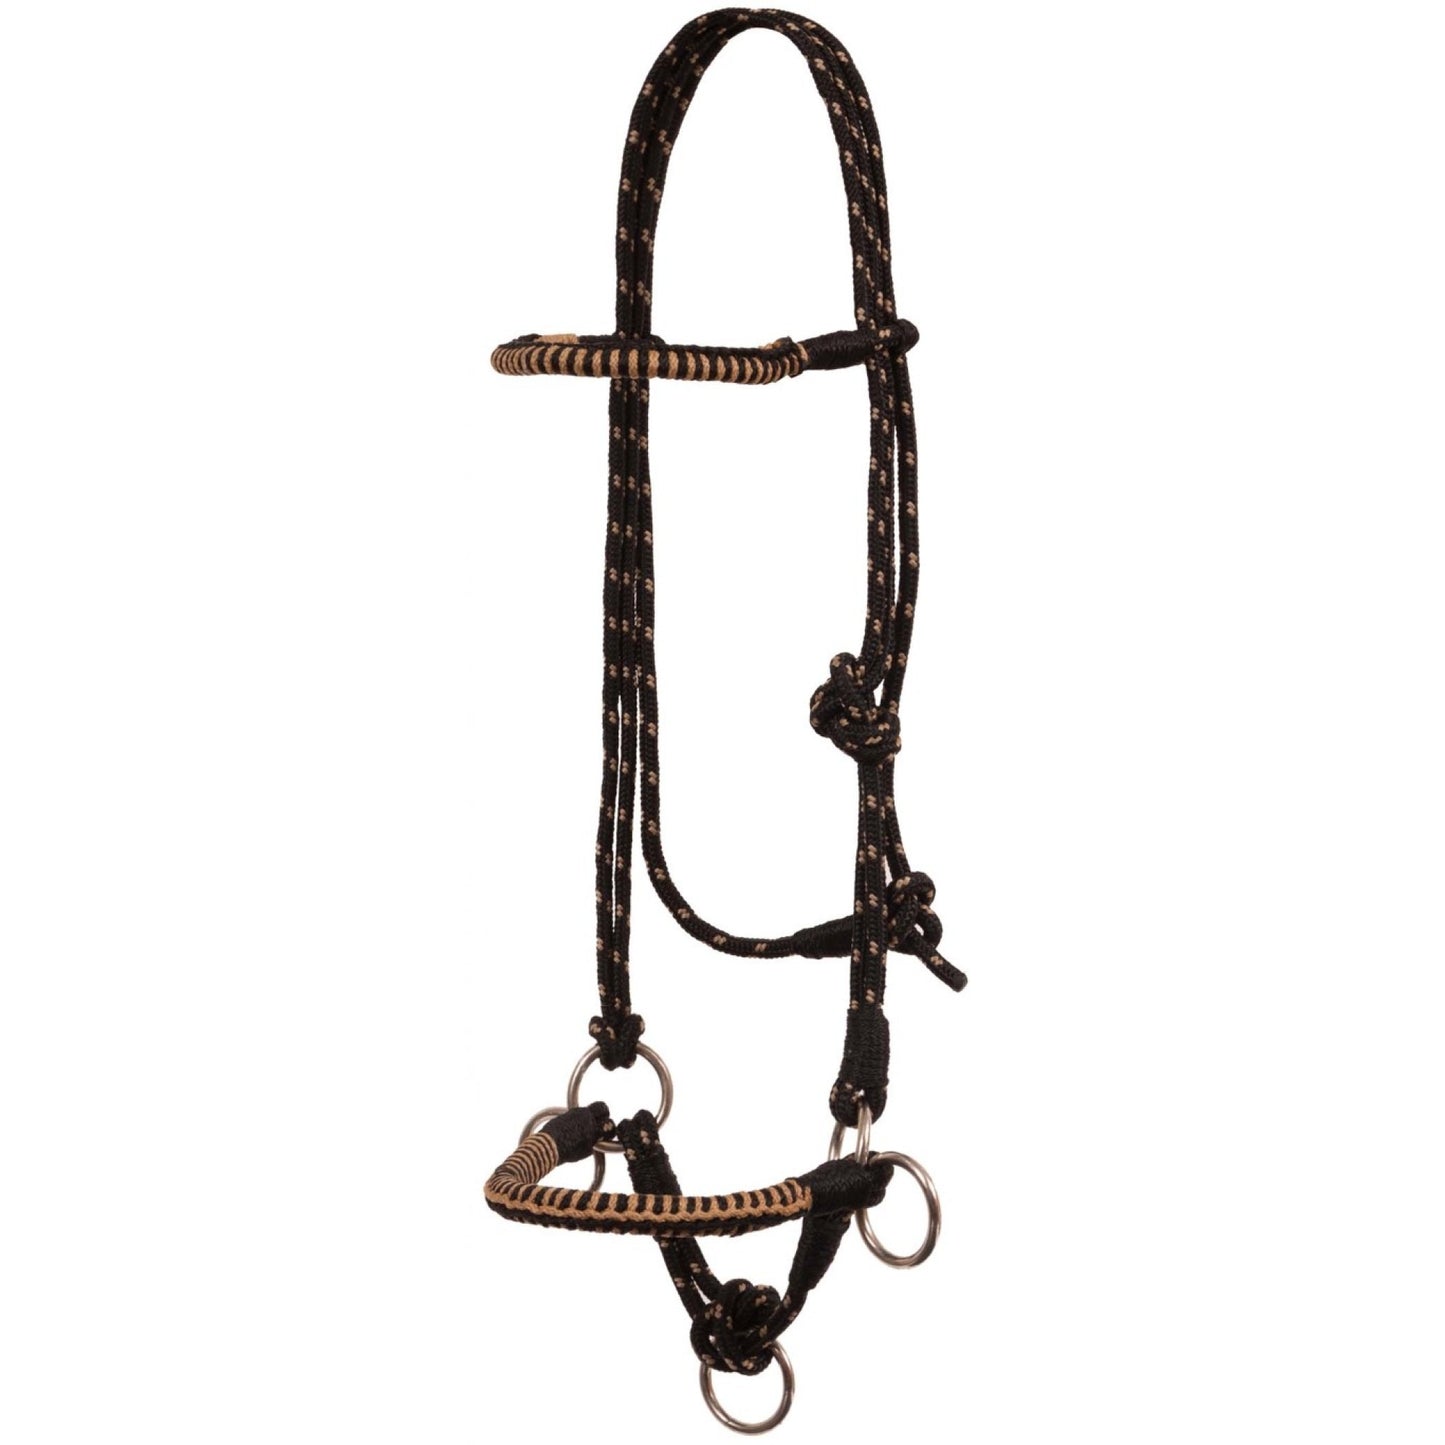 XFull/WB Size Side-Pull Bridle Halter Combo